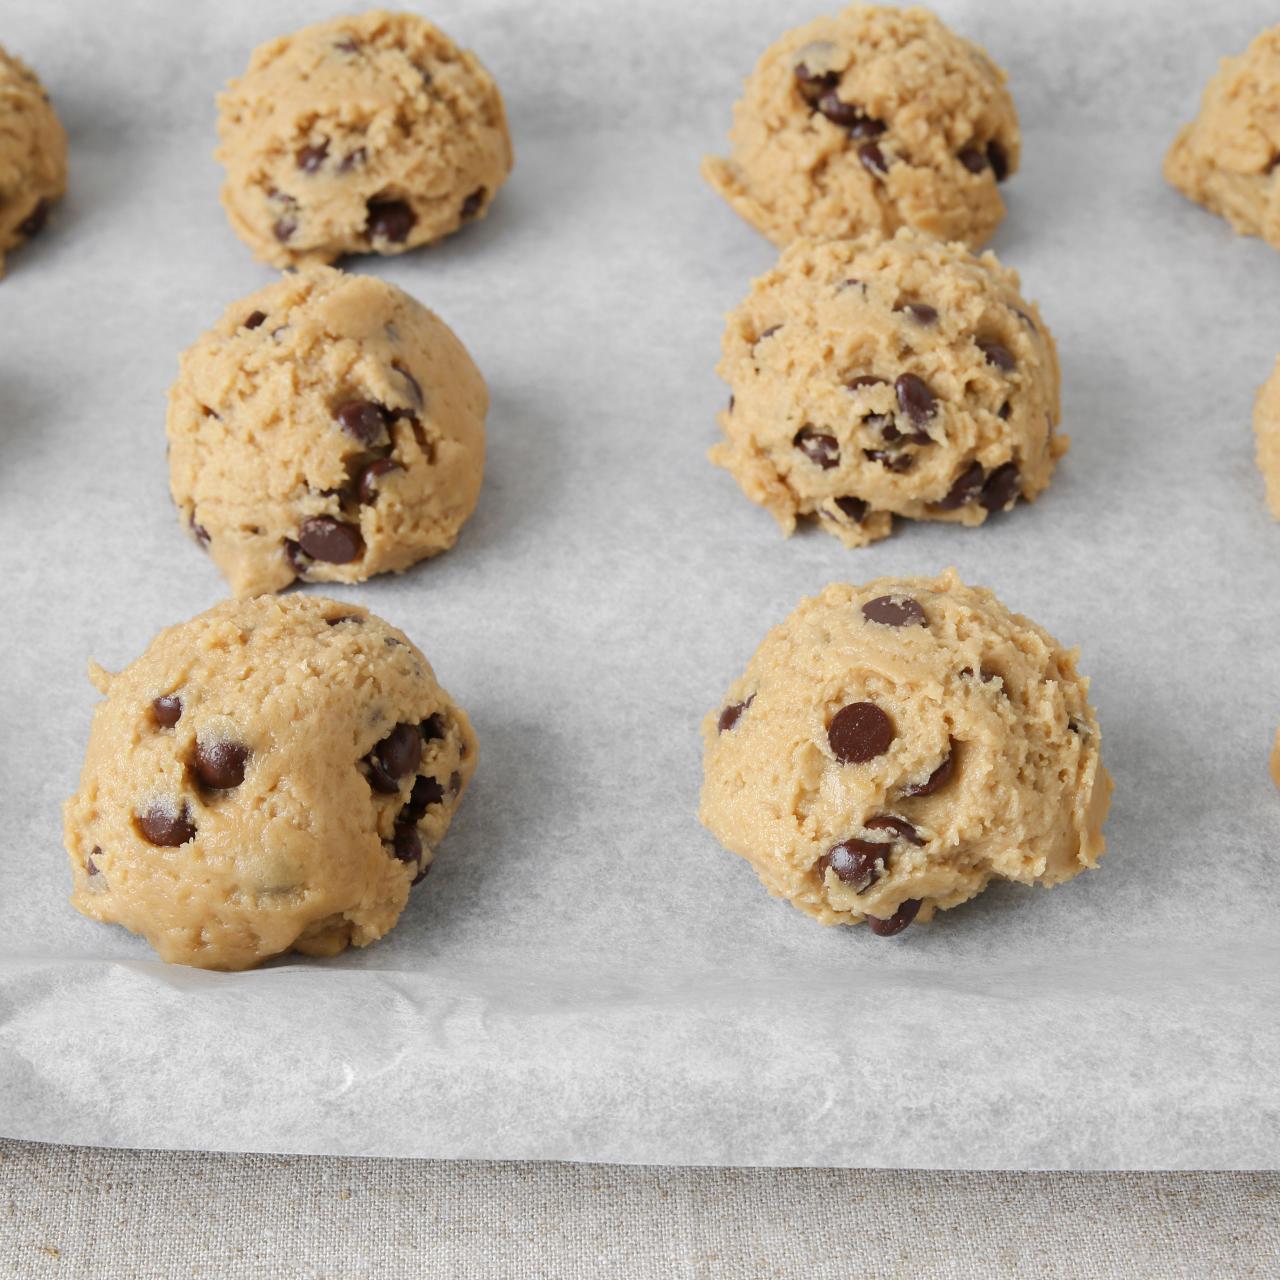 https://food.fnr.sndimg.com/content/dam/images/food/fullset/2021/08/16/raw-chocolate-chip-cookies-on-parchment-paper.jpg.rend.hgtvcom.1280.1280.suffix/1629134529774.jpeg